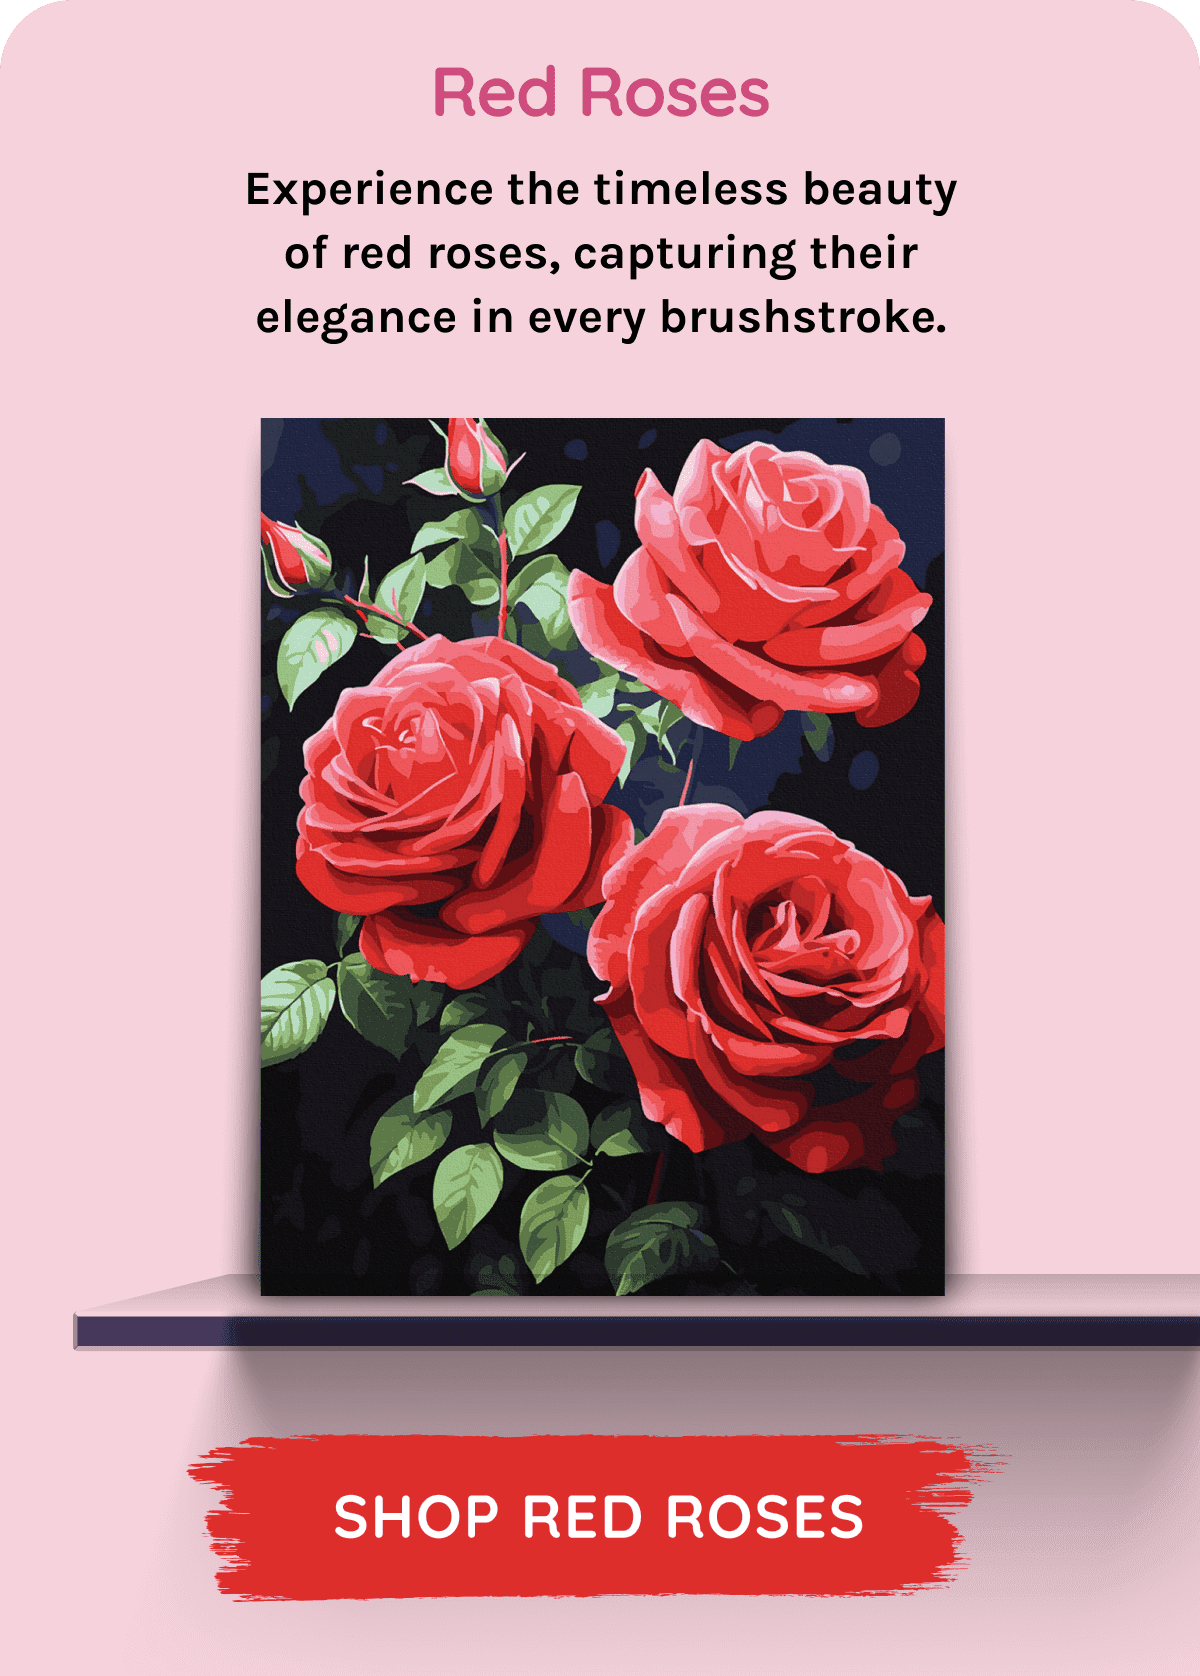 Red Roses Experience the timeless beauty of red roses, capturing their elegance in every brushstroke.